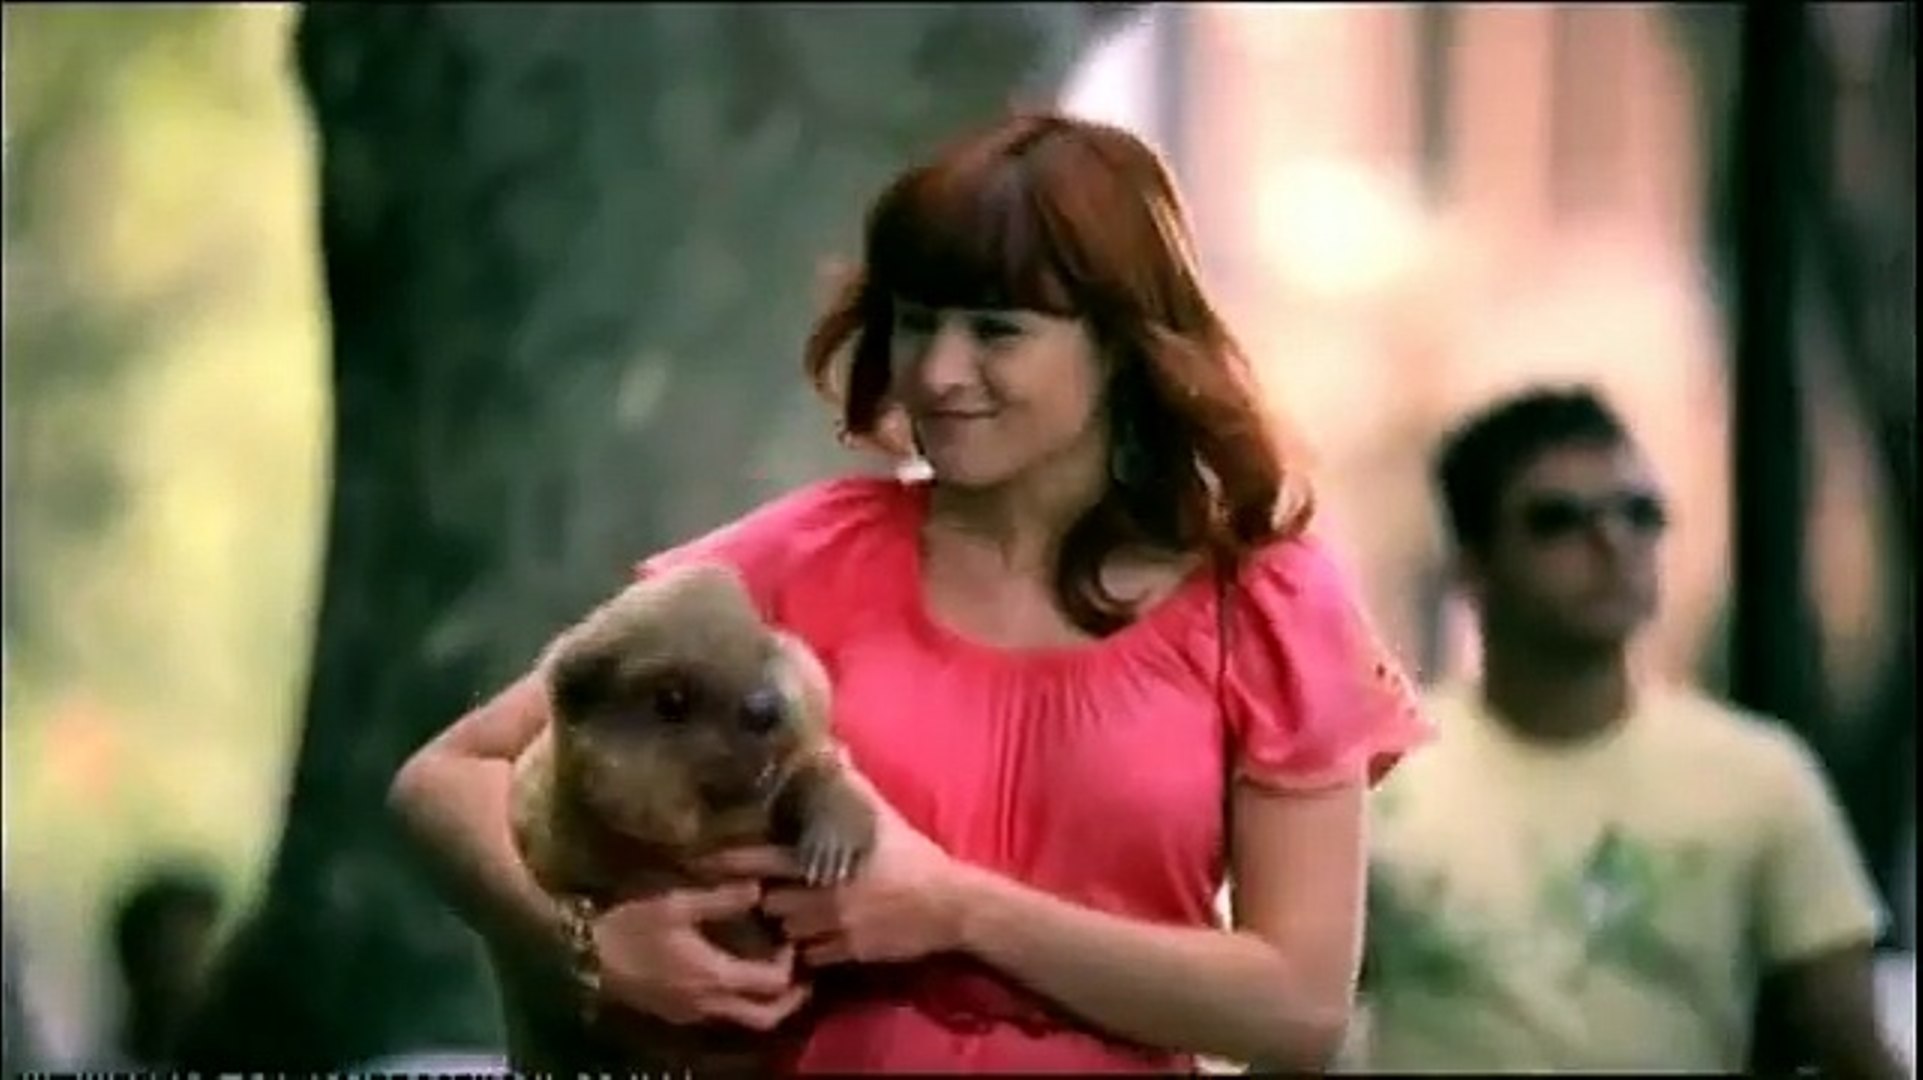 Beaver with woman: Kotex advertisement tampon